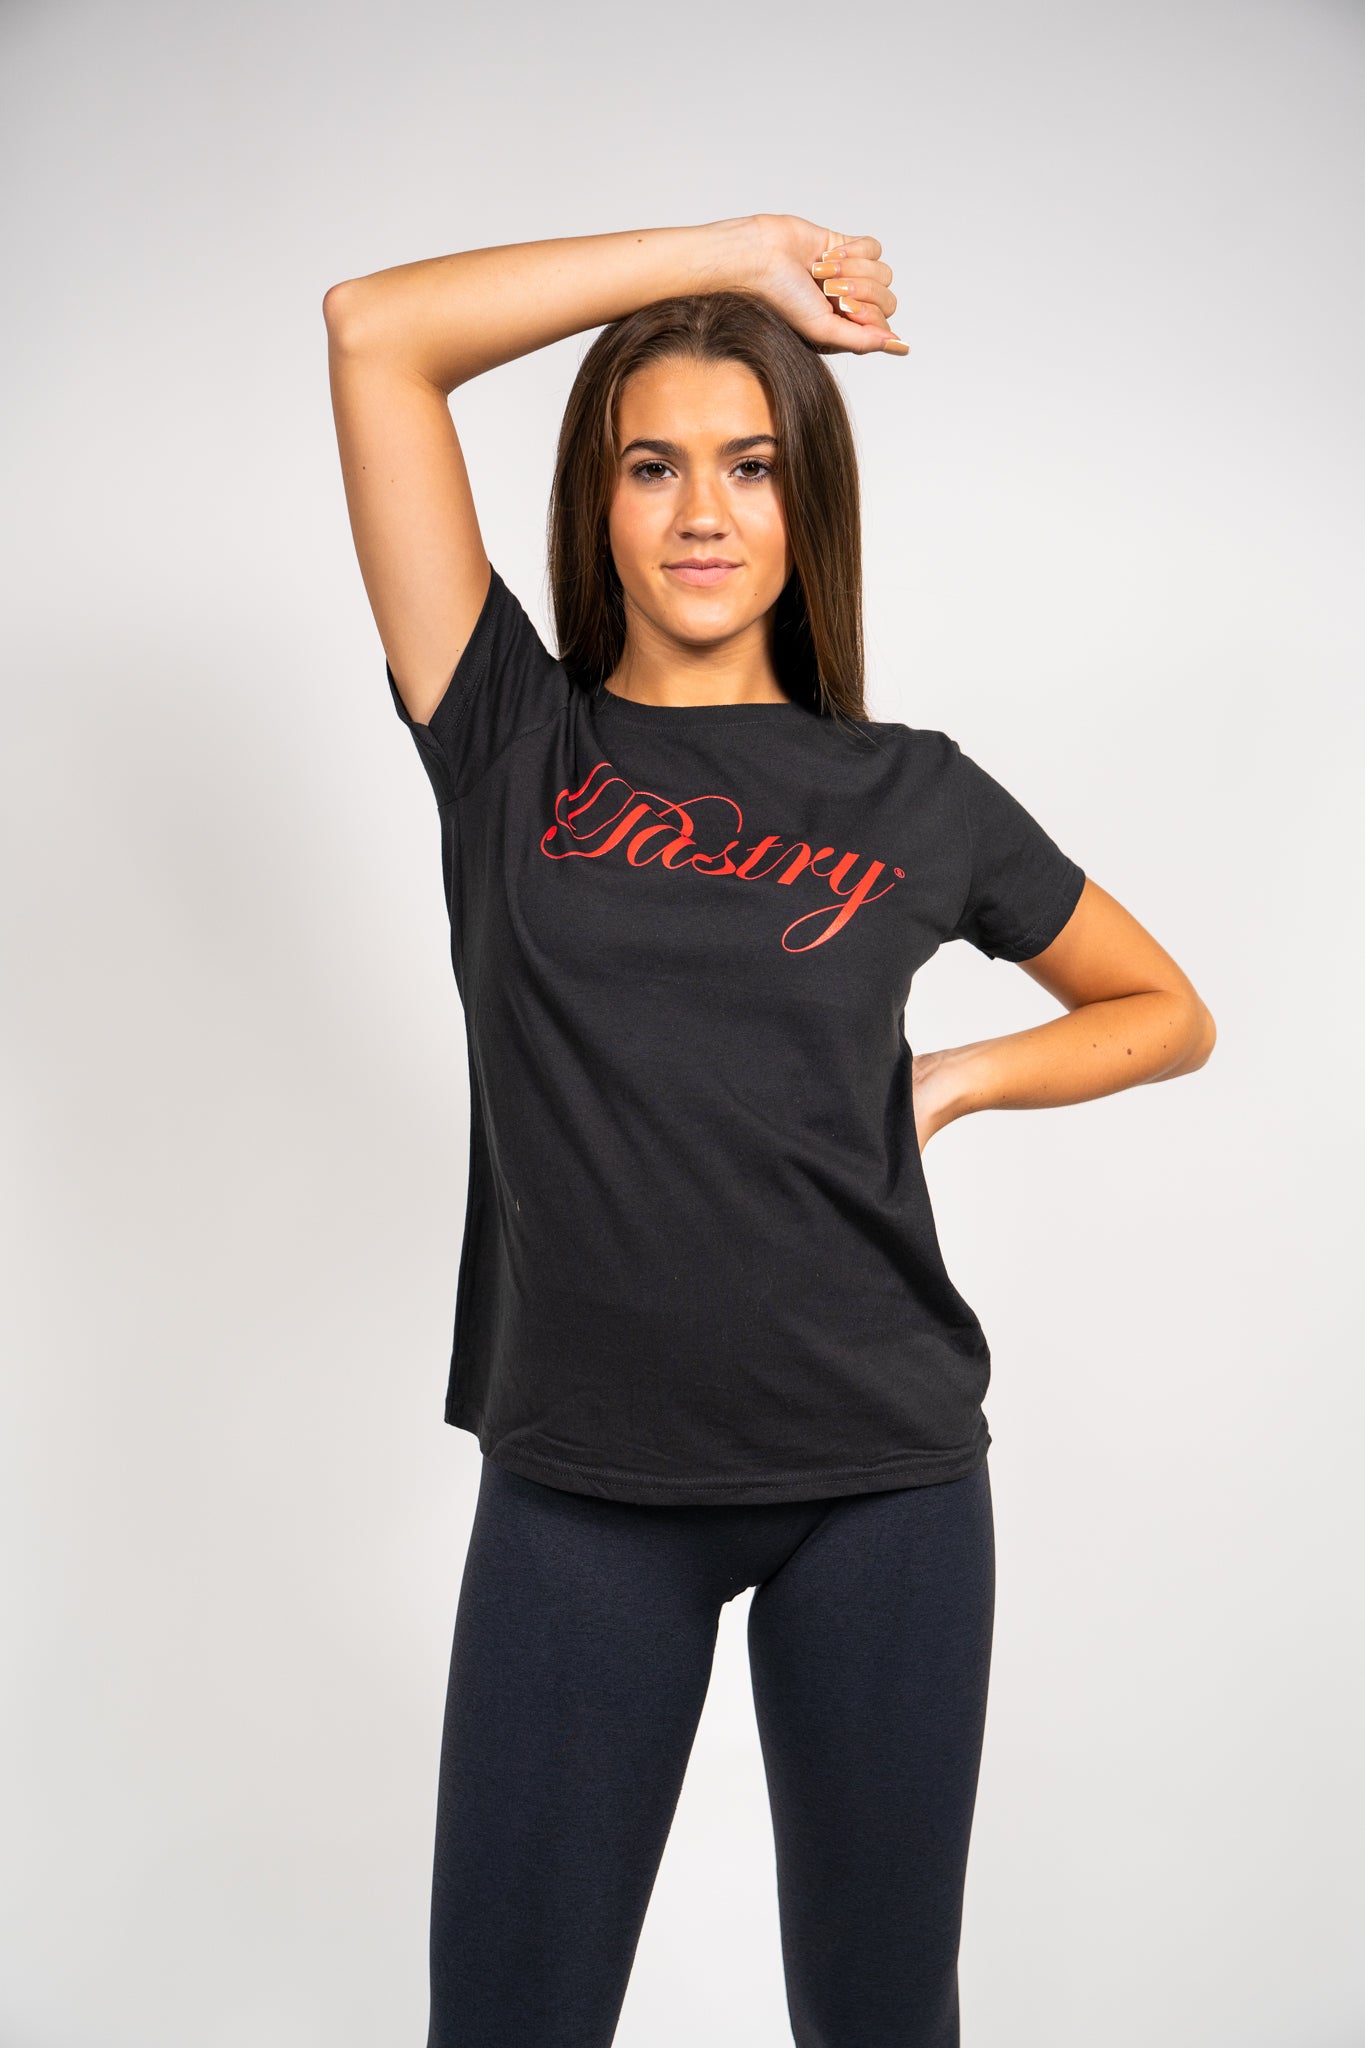 Pastry Tee Shirt Black with Red Logo when worn